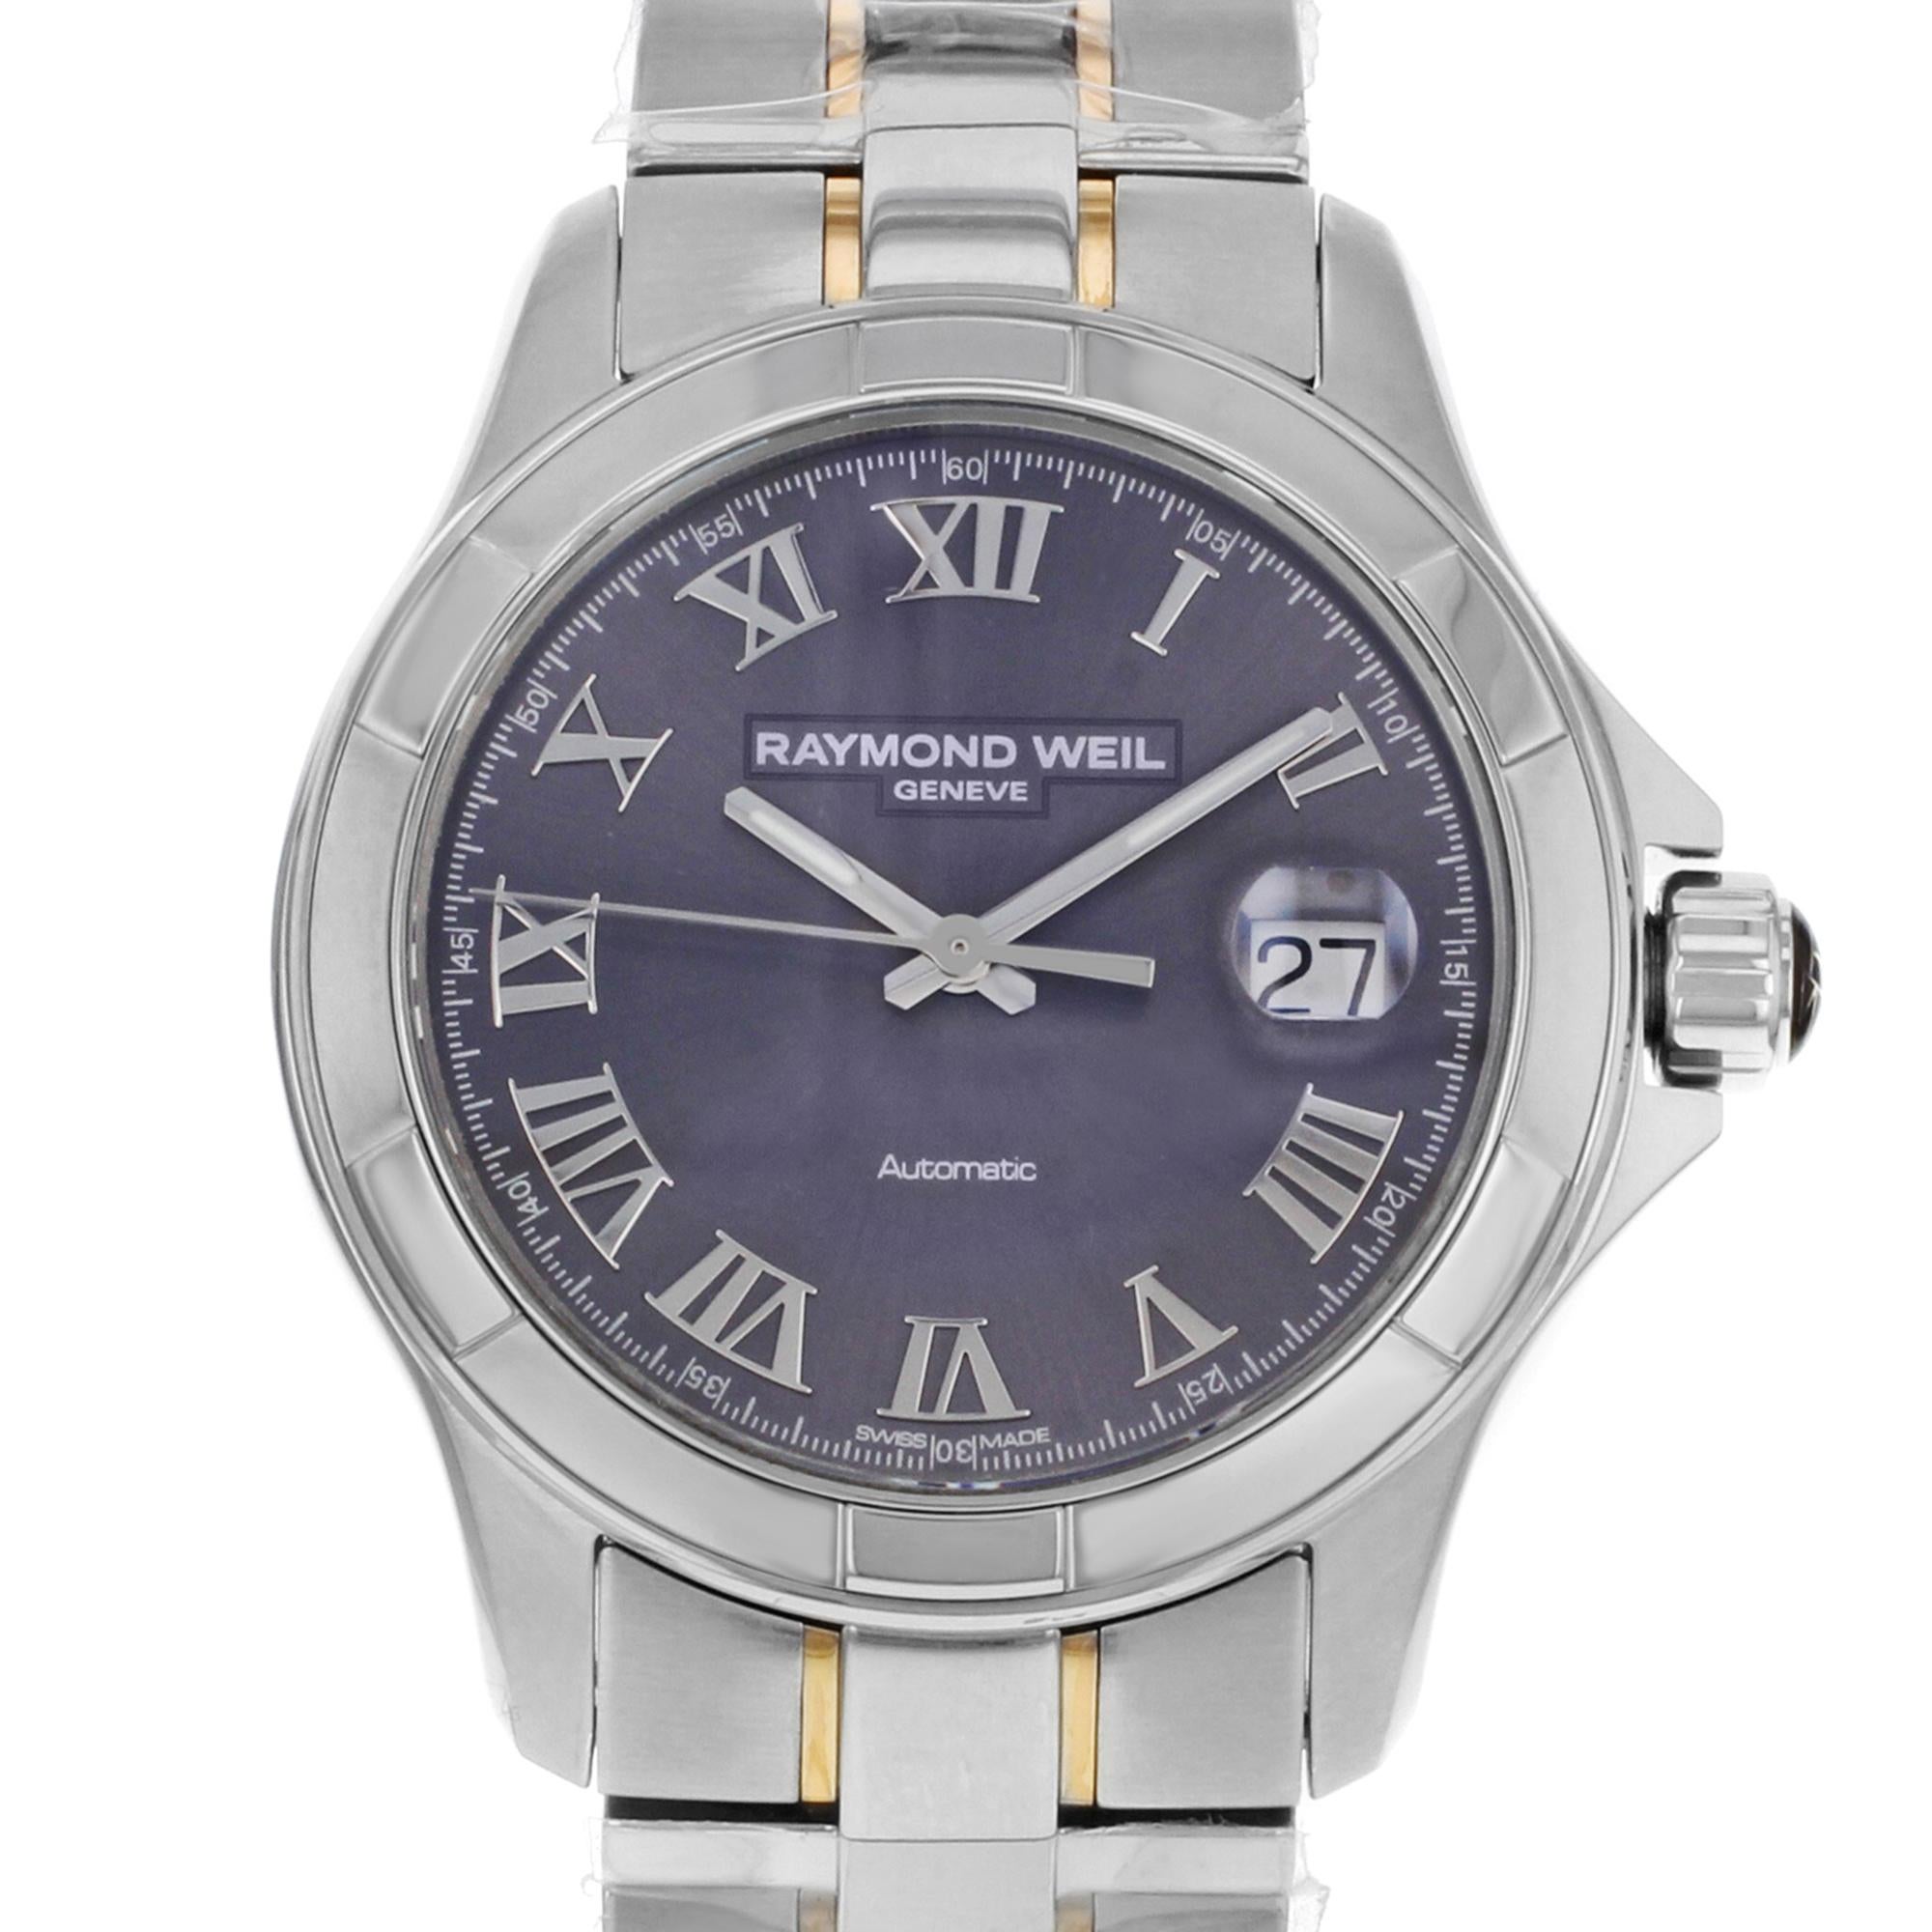 This pre-owned Raymond Weil Parsifal  2970 is a beautiful men's timepiece that is powered by mechanical (automatic) movement which is cased in a stainless steel case. It has a round shape face, date indicator dial and has hand roman numerals style